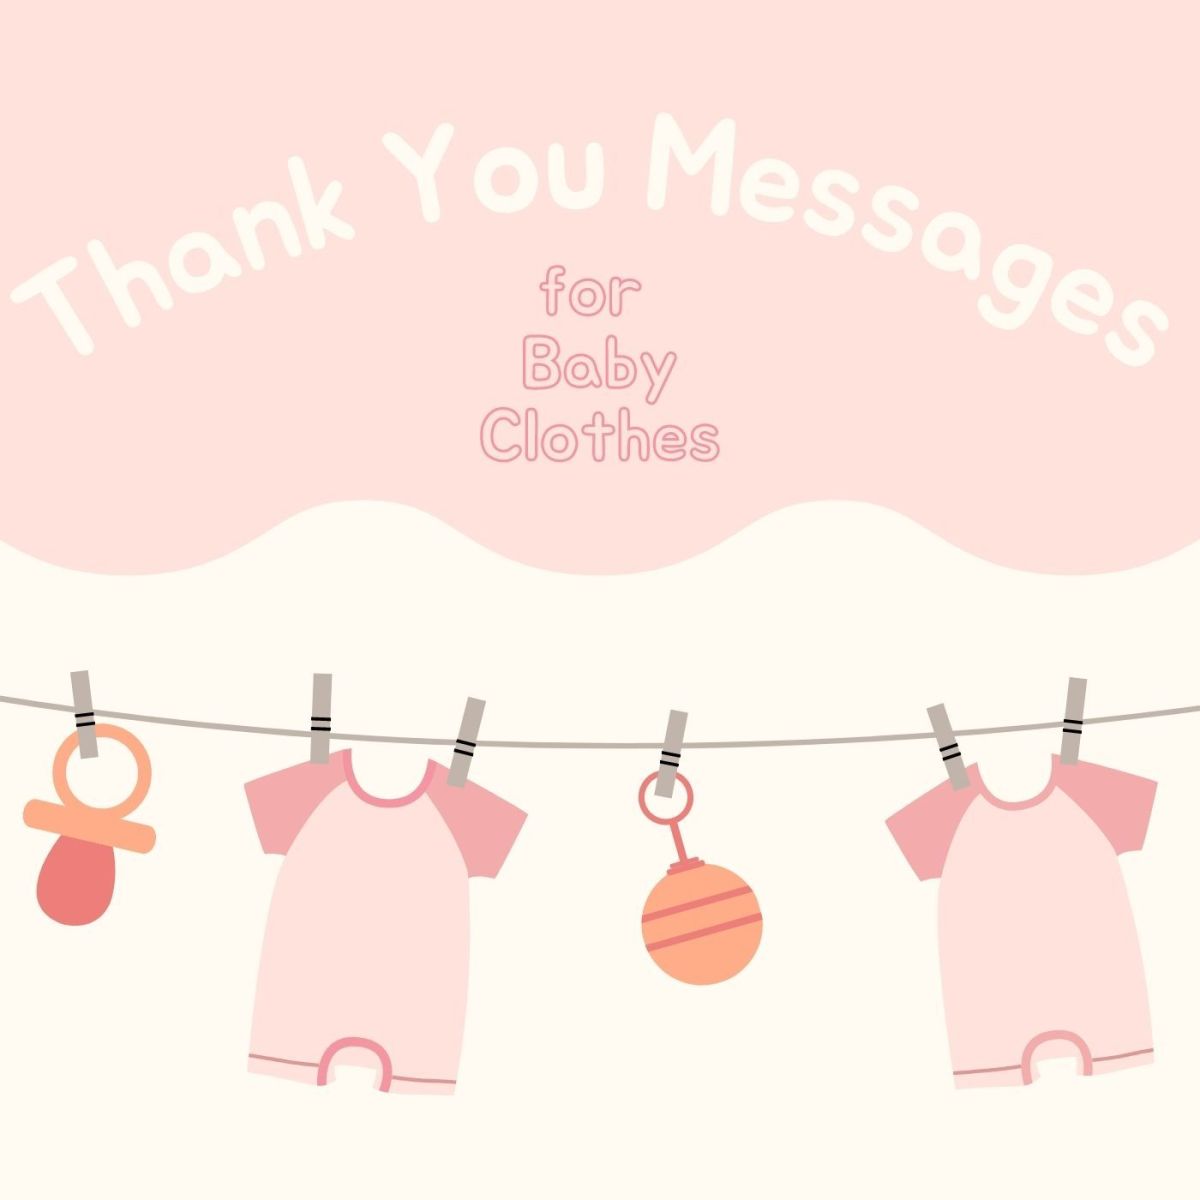 Sample Thank You Notes for Baby Clothing